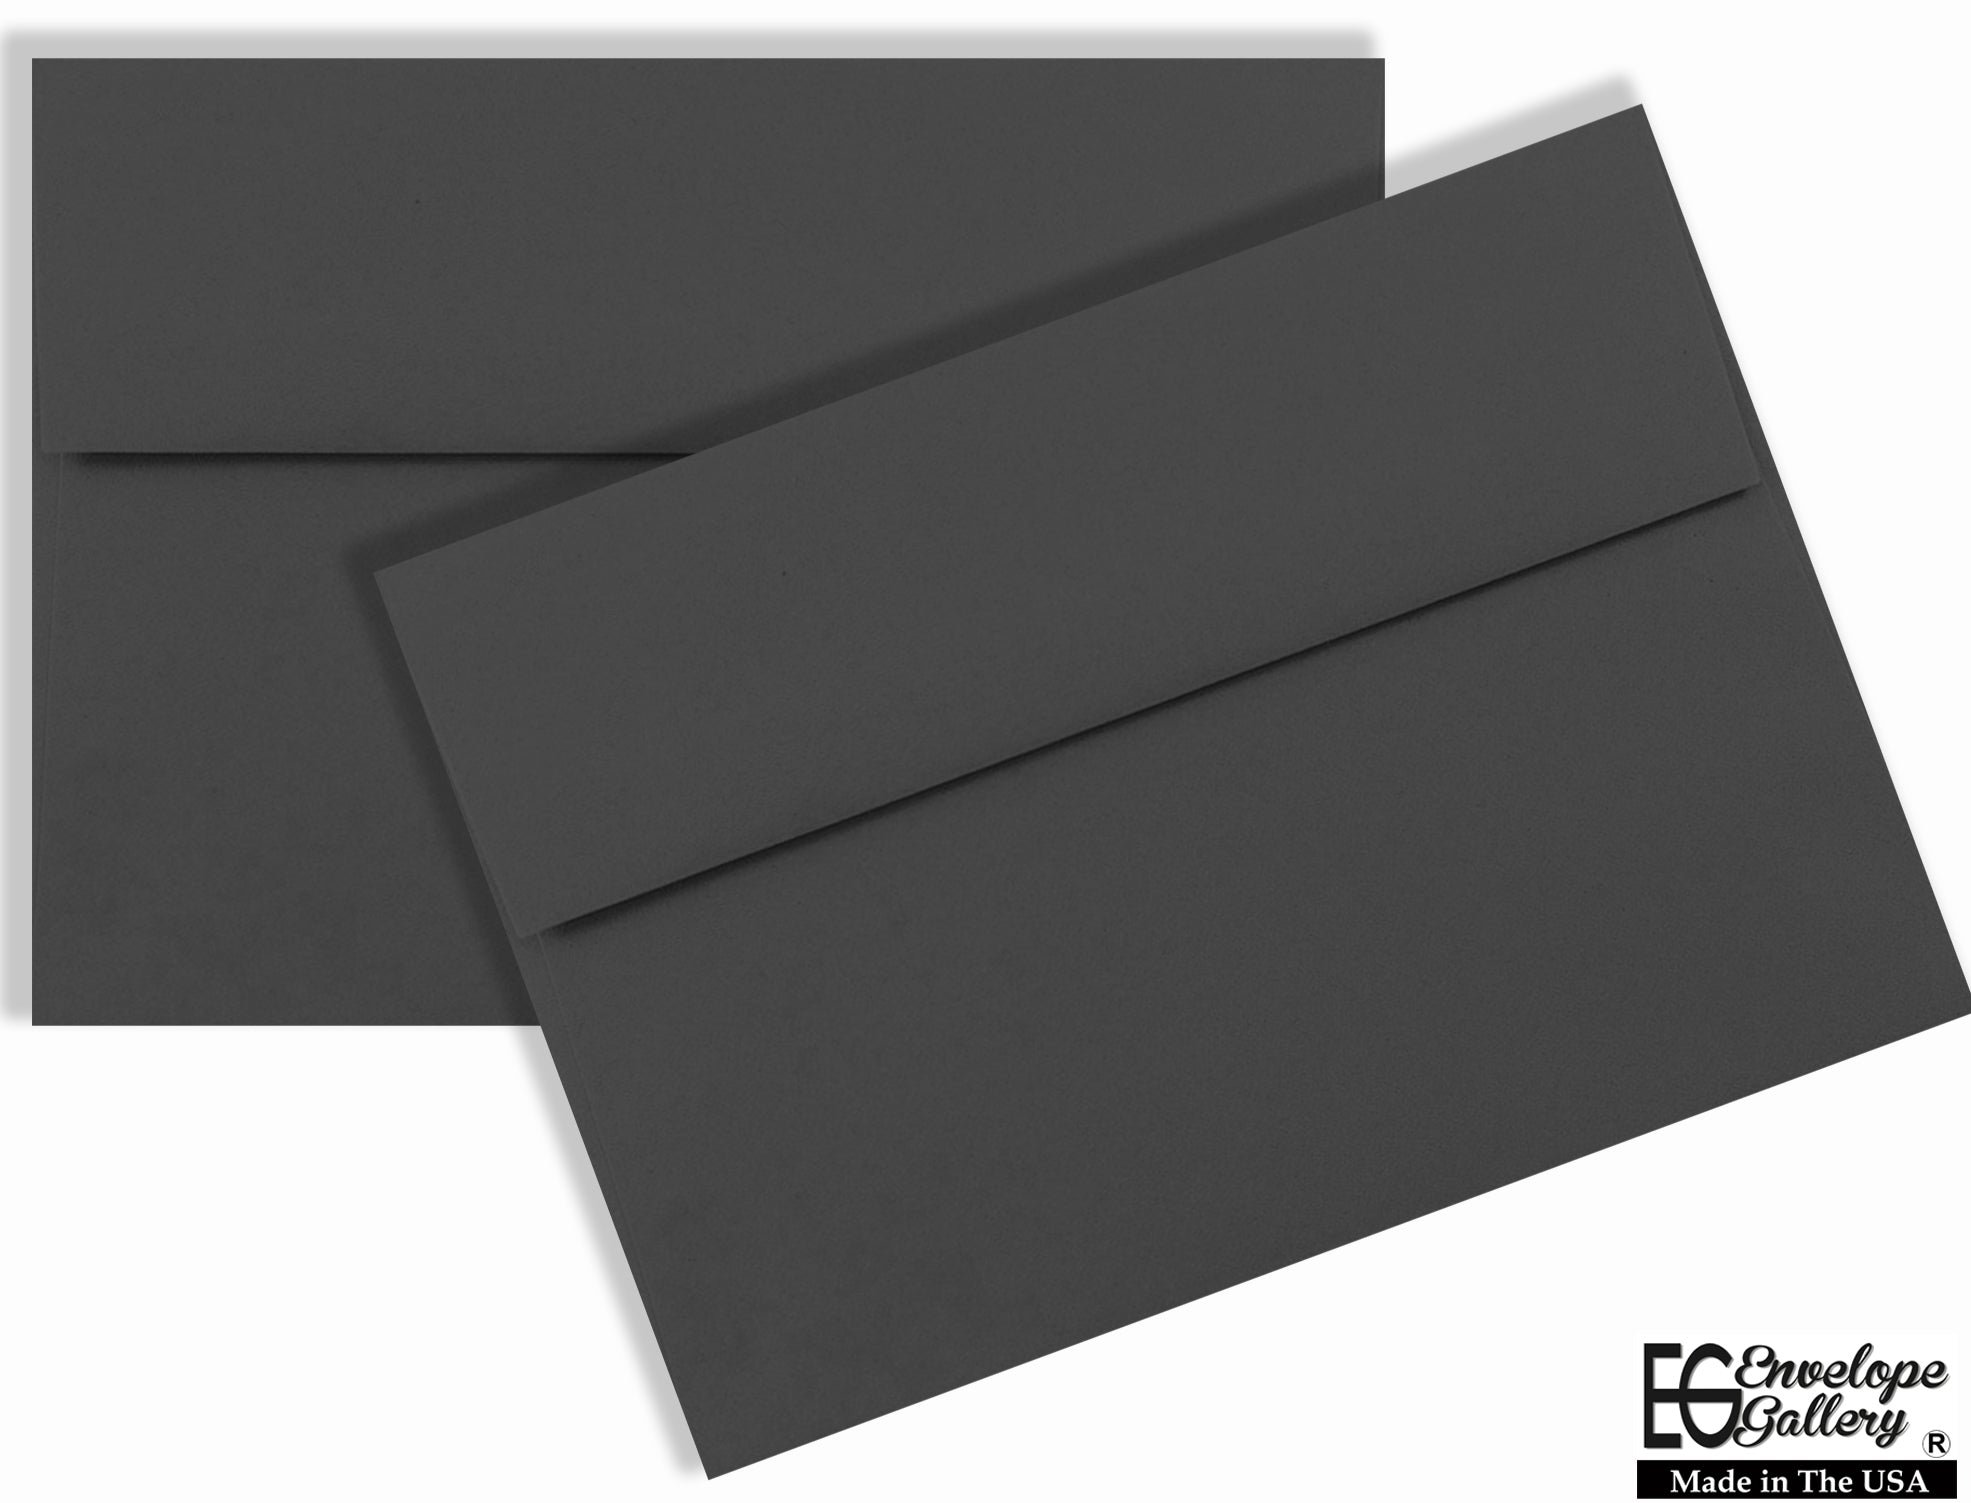 Jet Black 70lb Envelopes perfect for Invitations Announcements Respons –  The Envelope Gallery